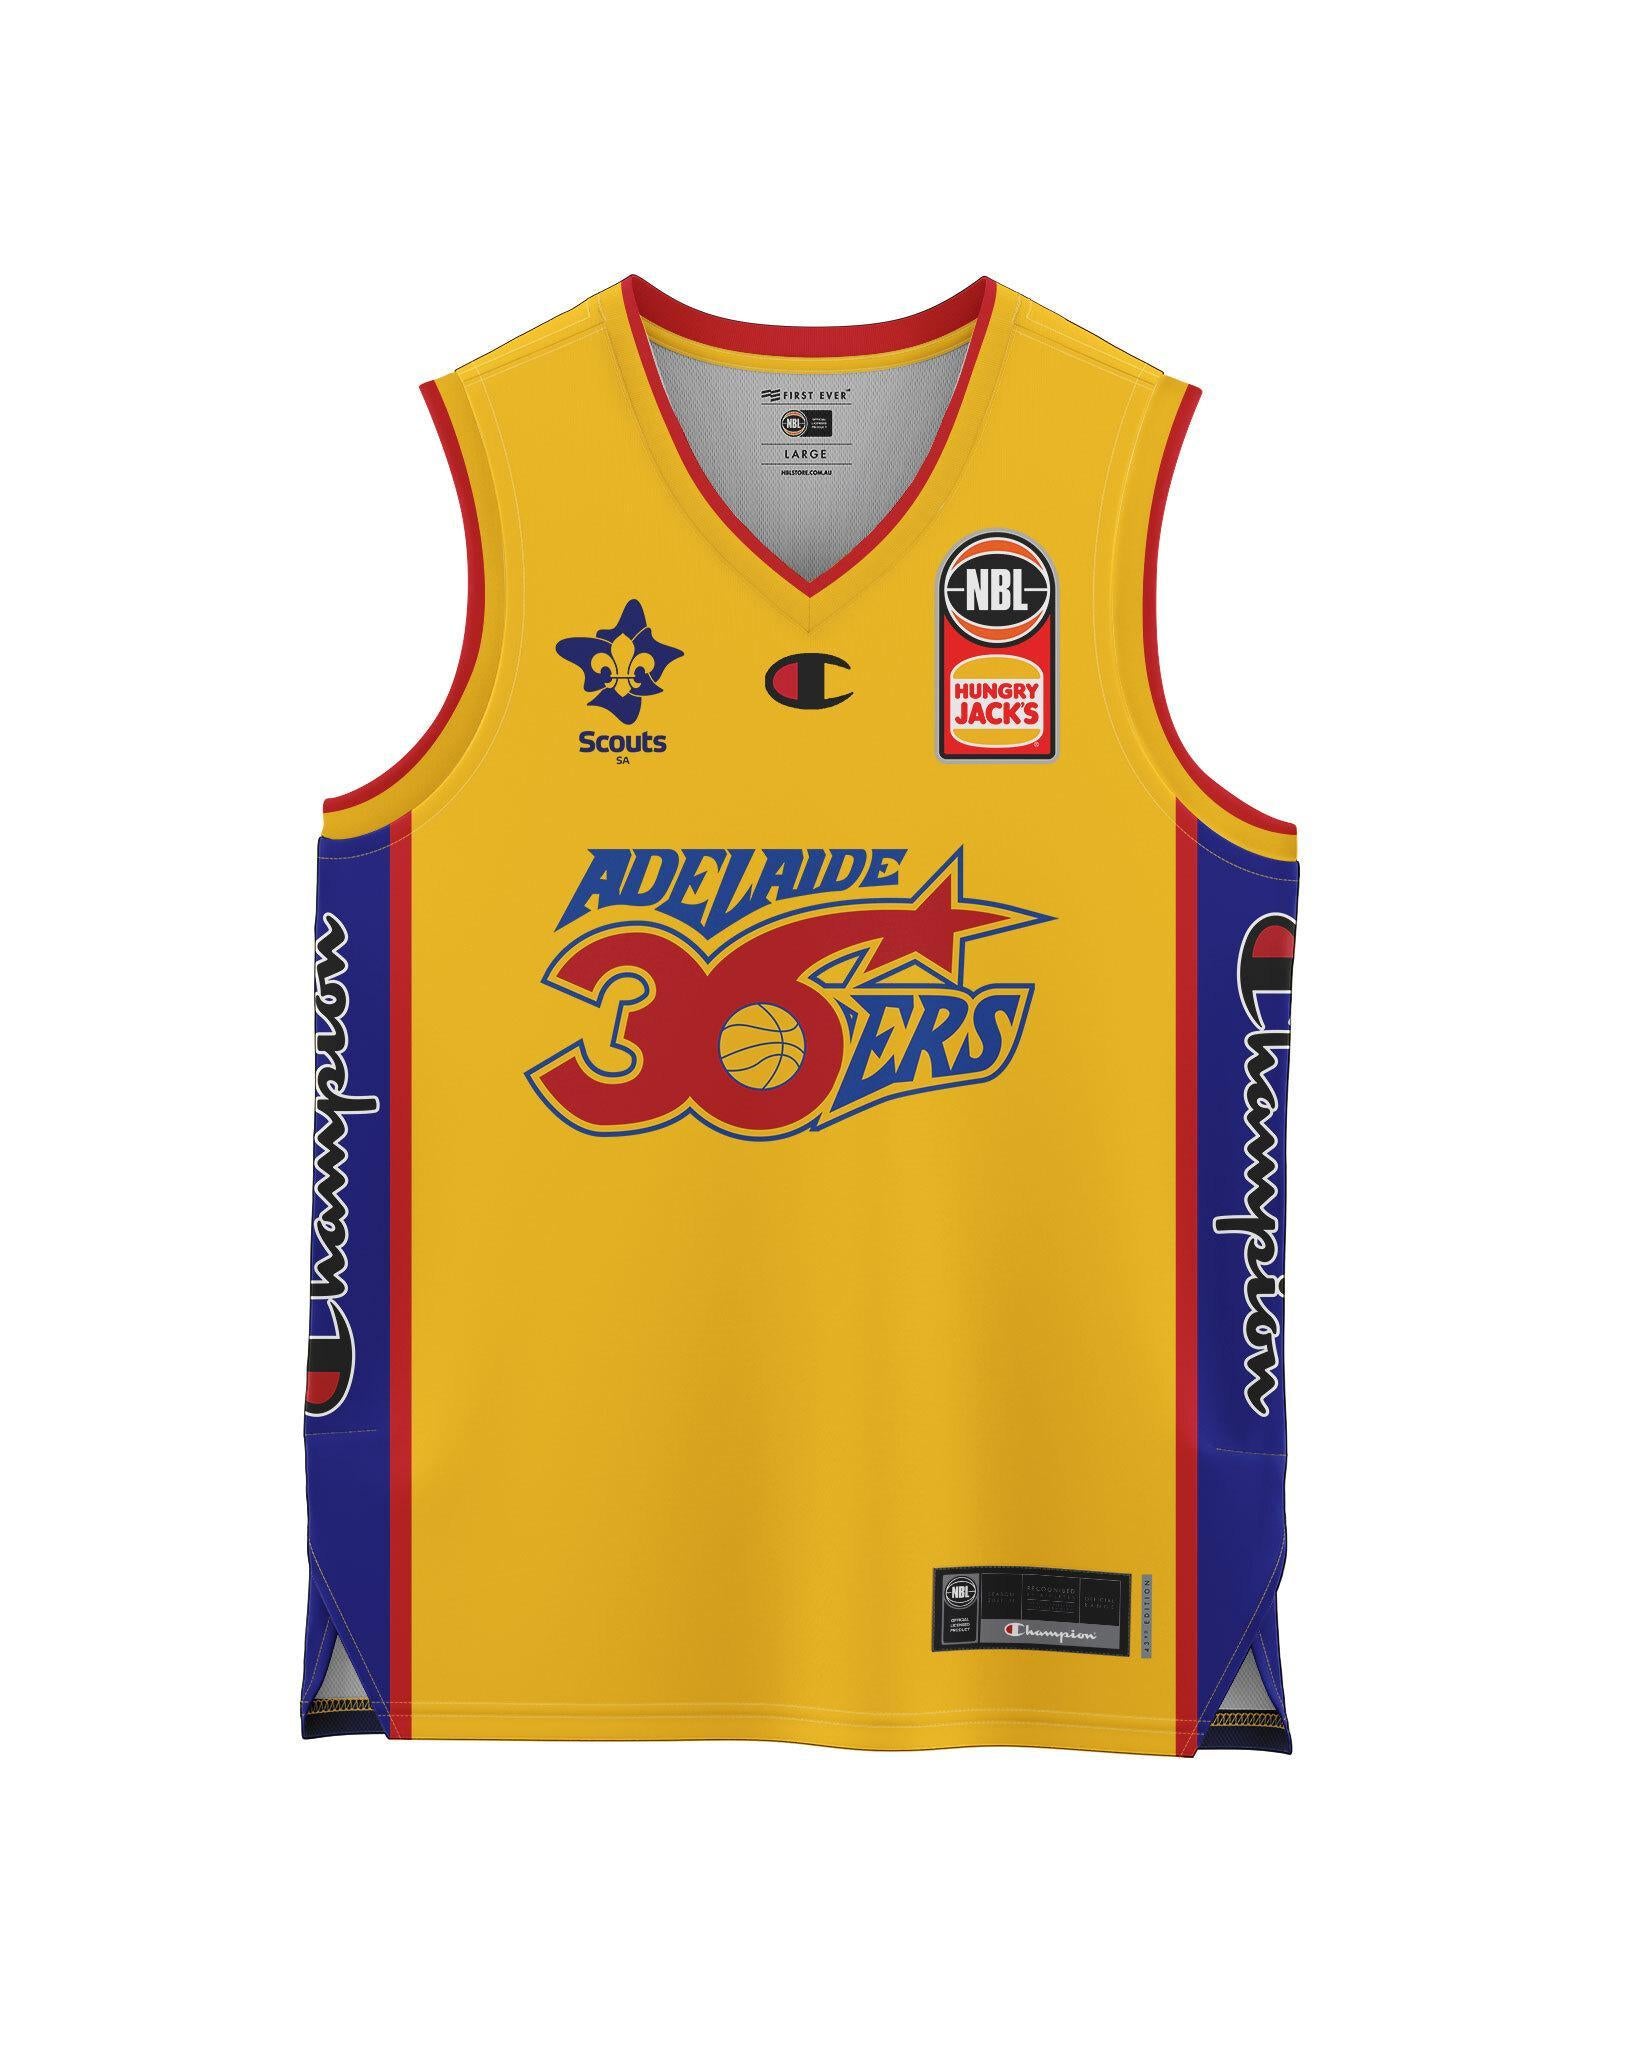 Adelaide 36ers 2021 Authentic Heritage Adult Jersey - Adelaide 36ers